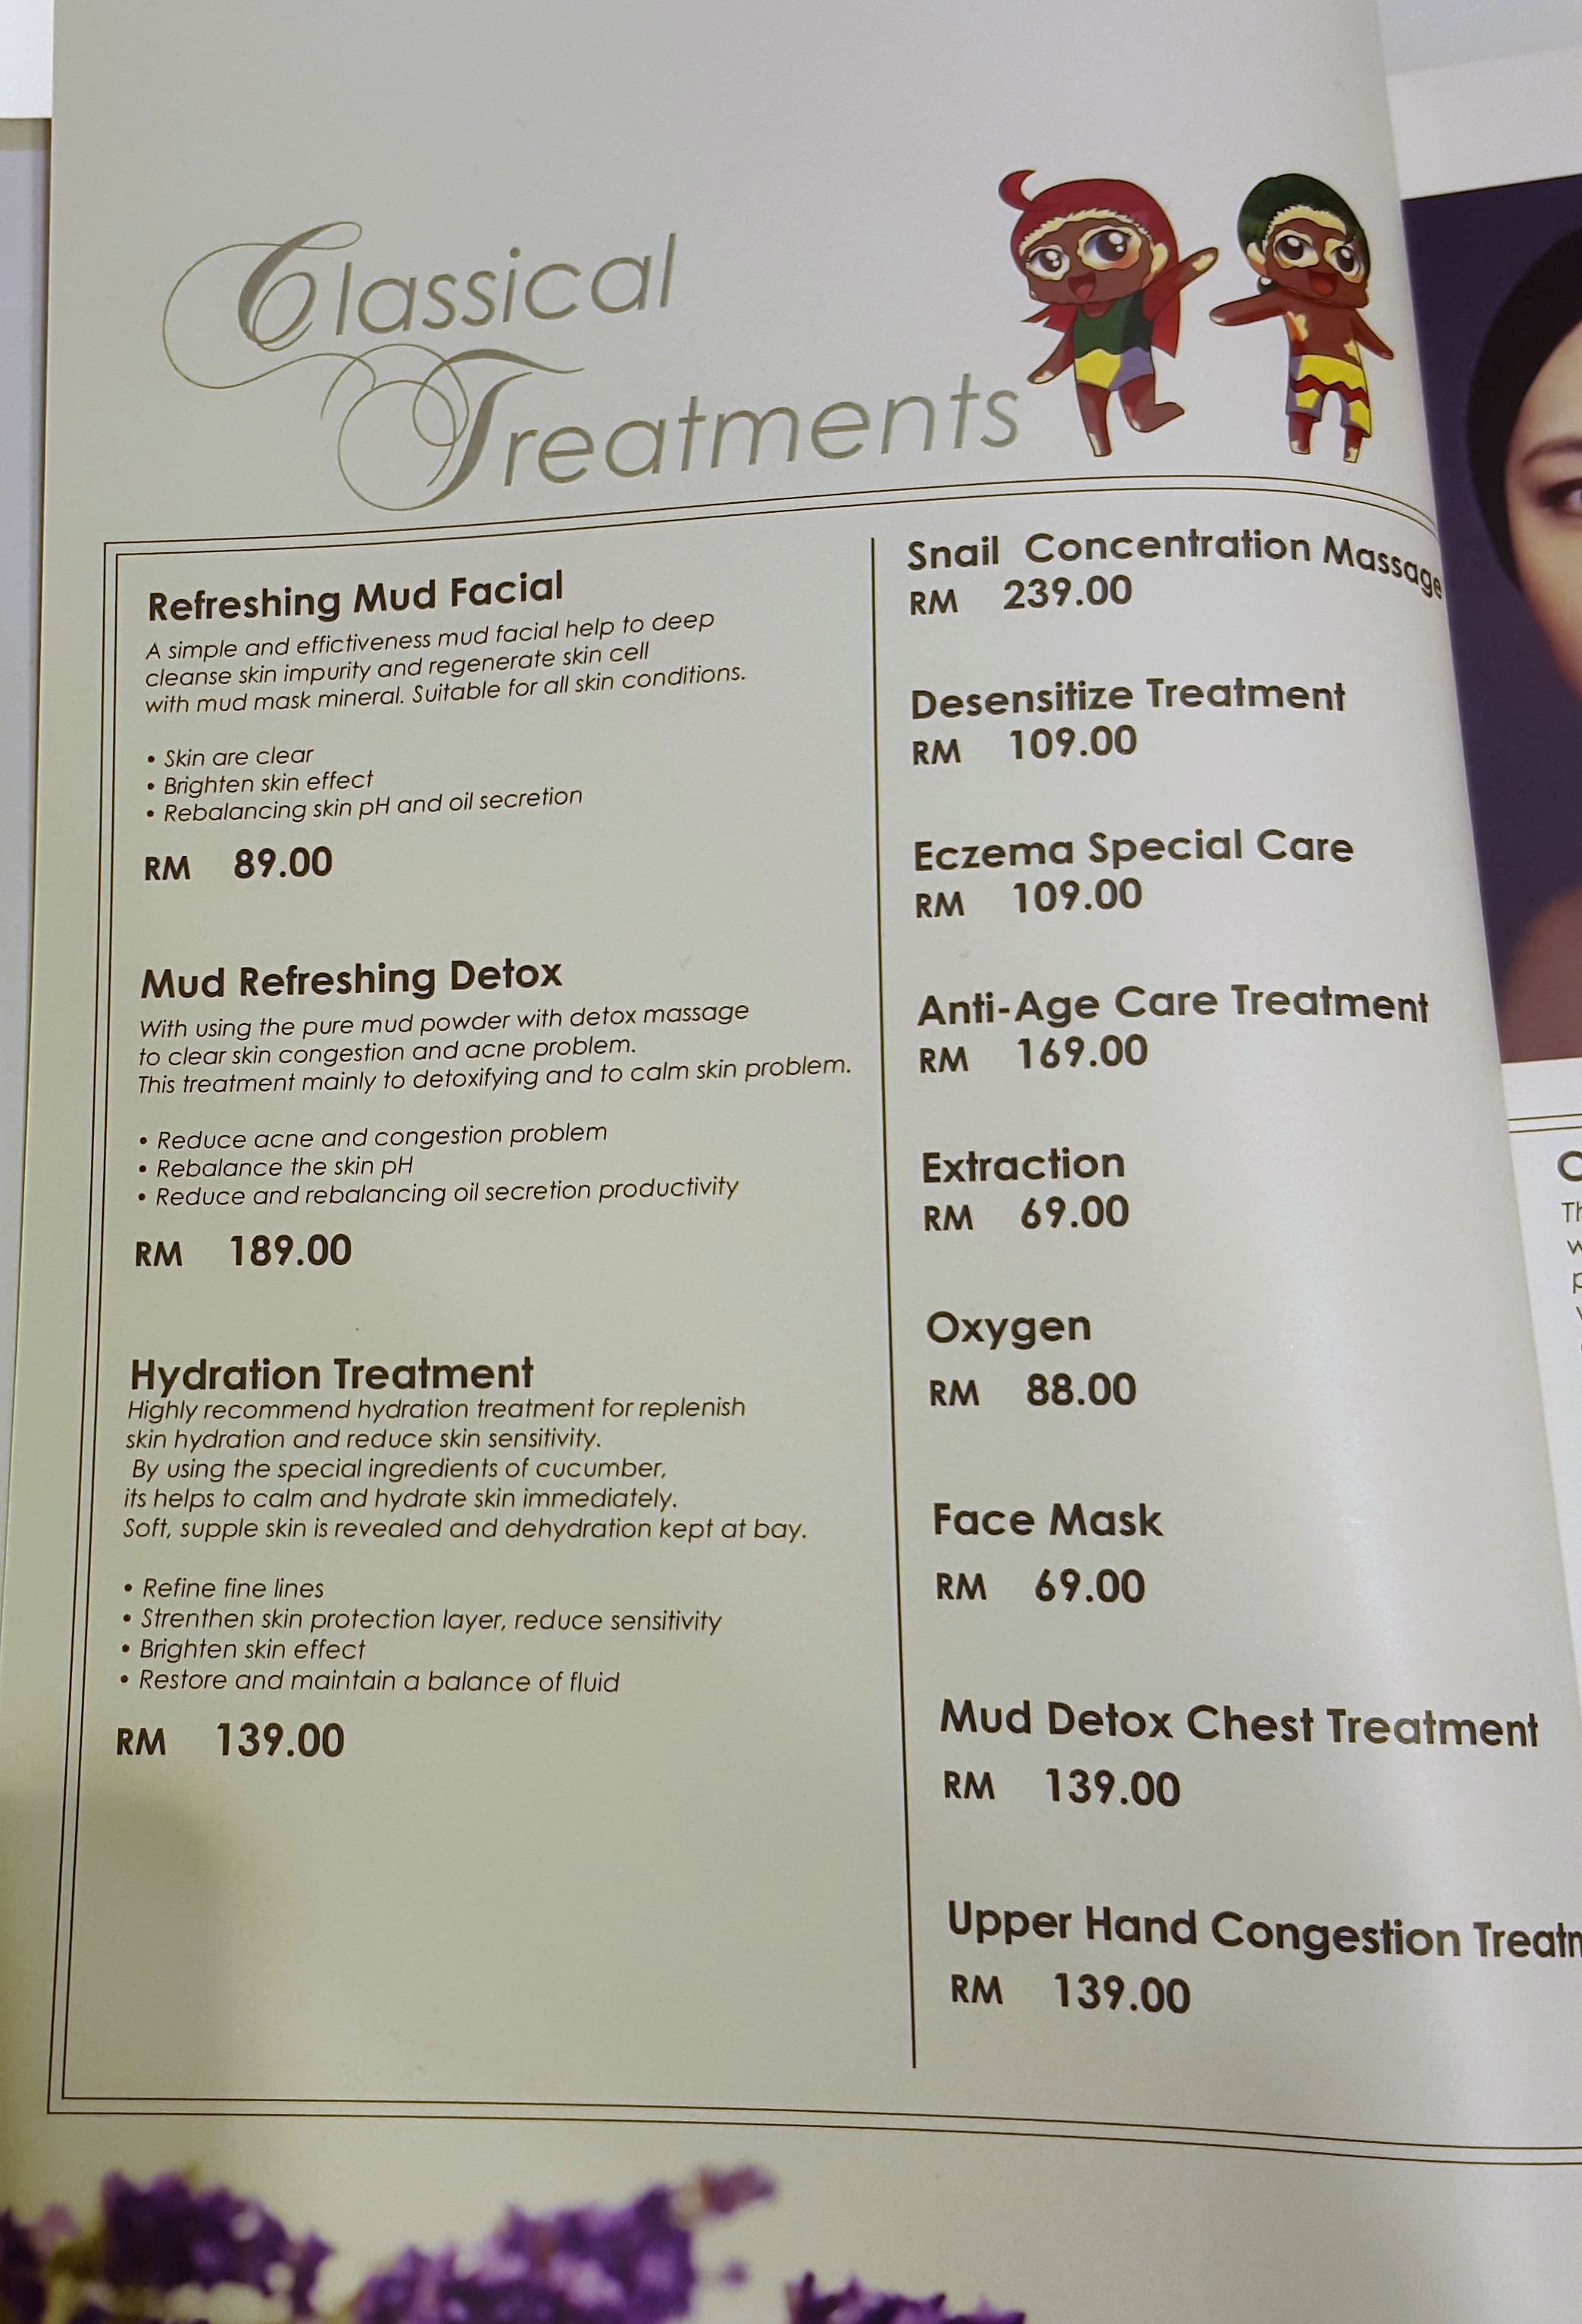 A preview of the treatments available